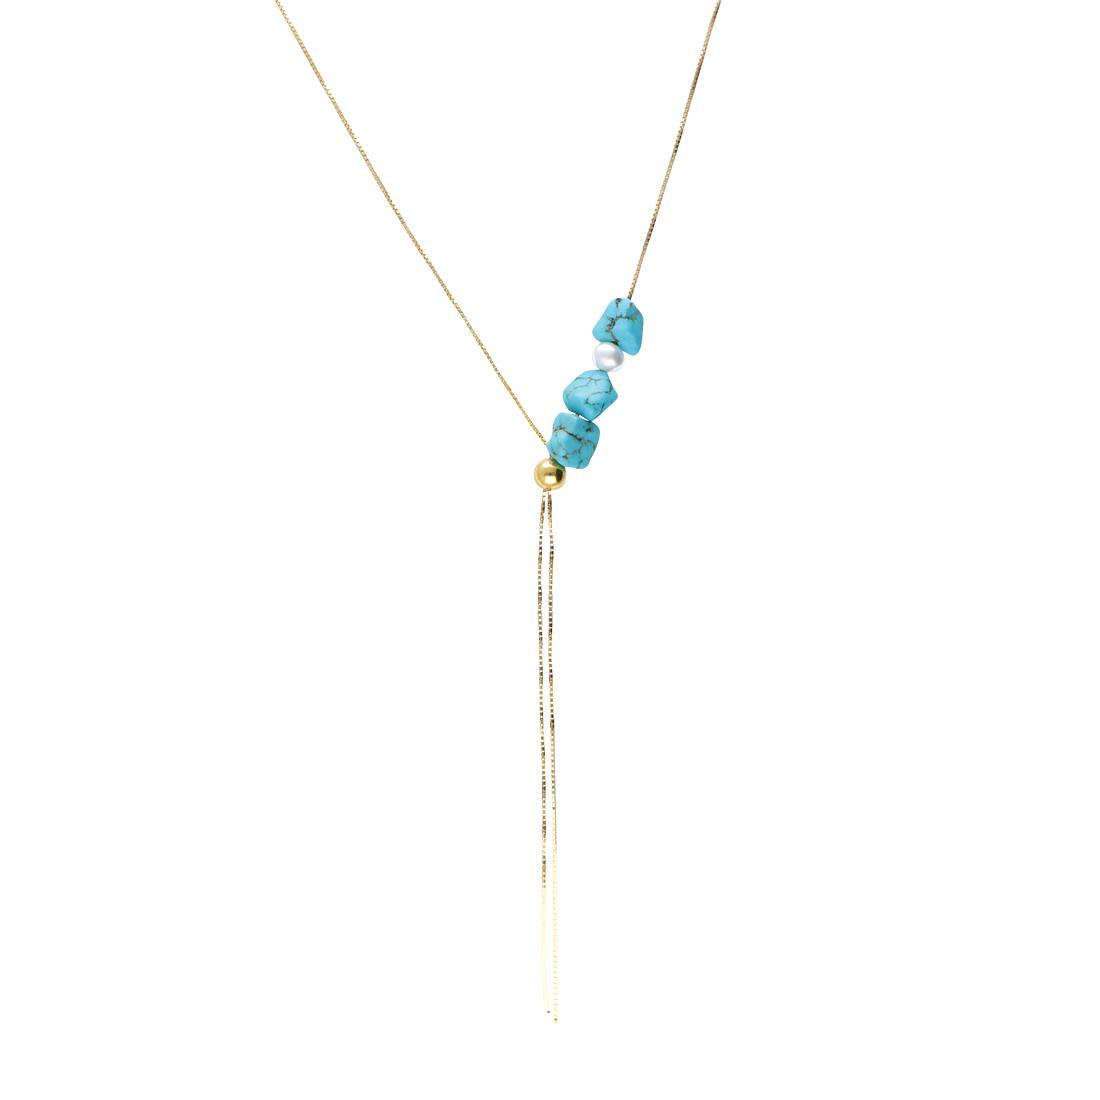 Gilded silver necklace with turquoise and pearls - MAYUMI